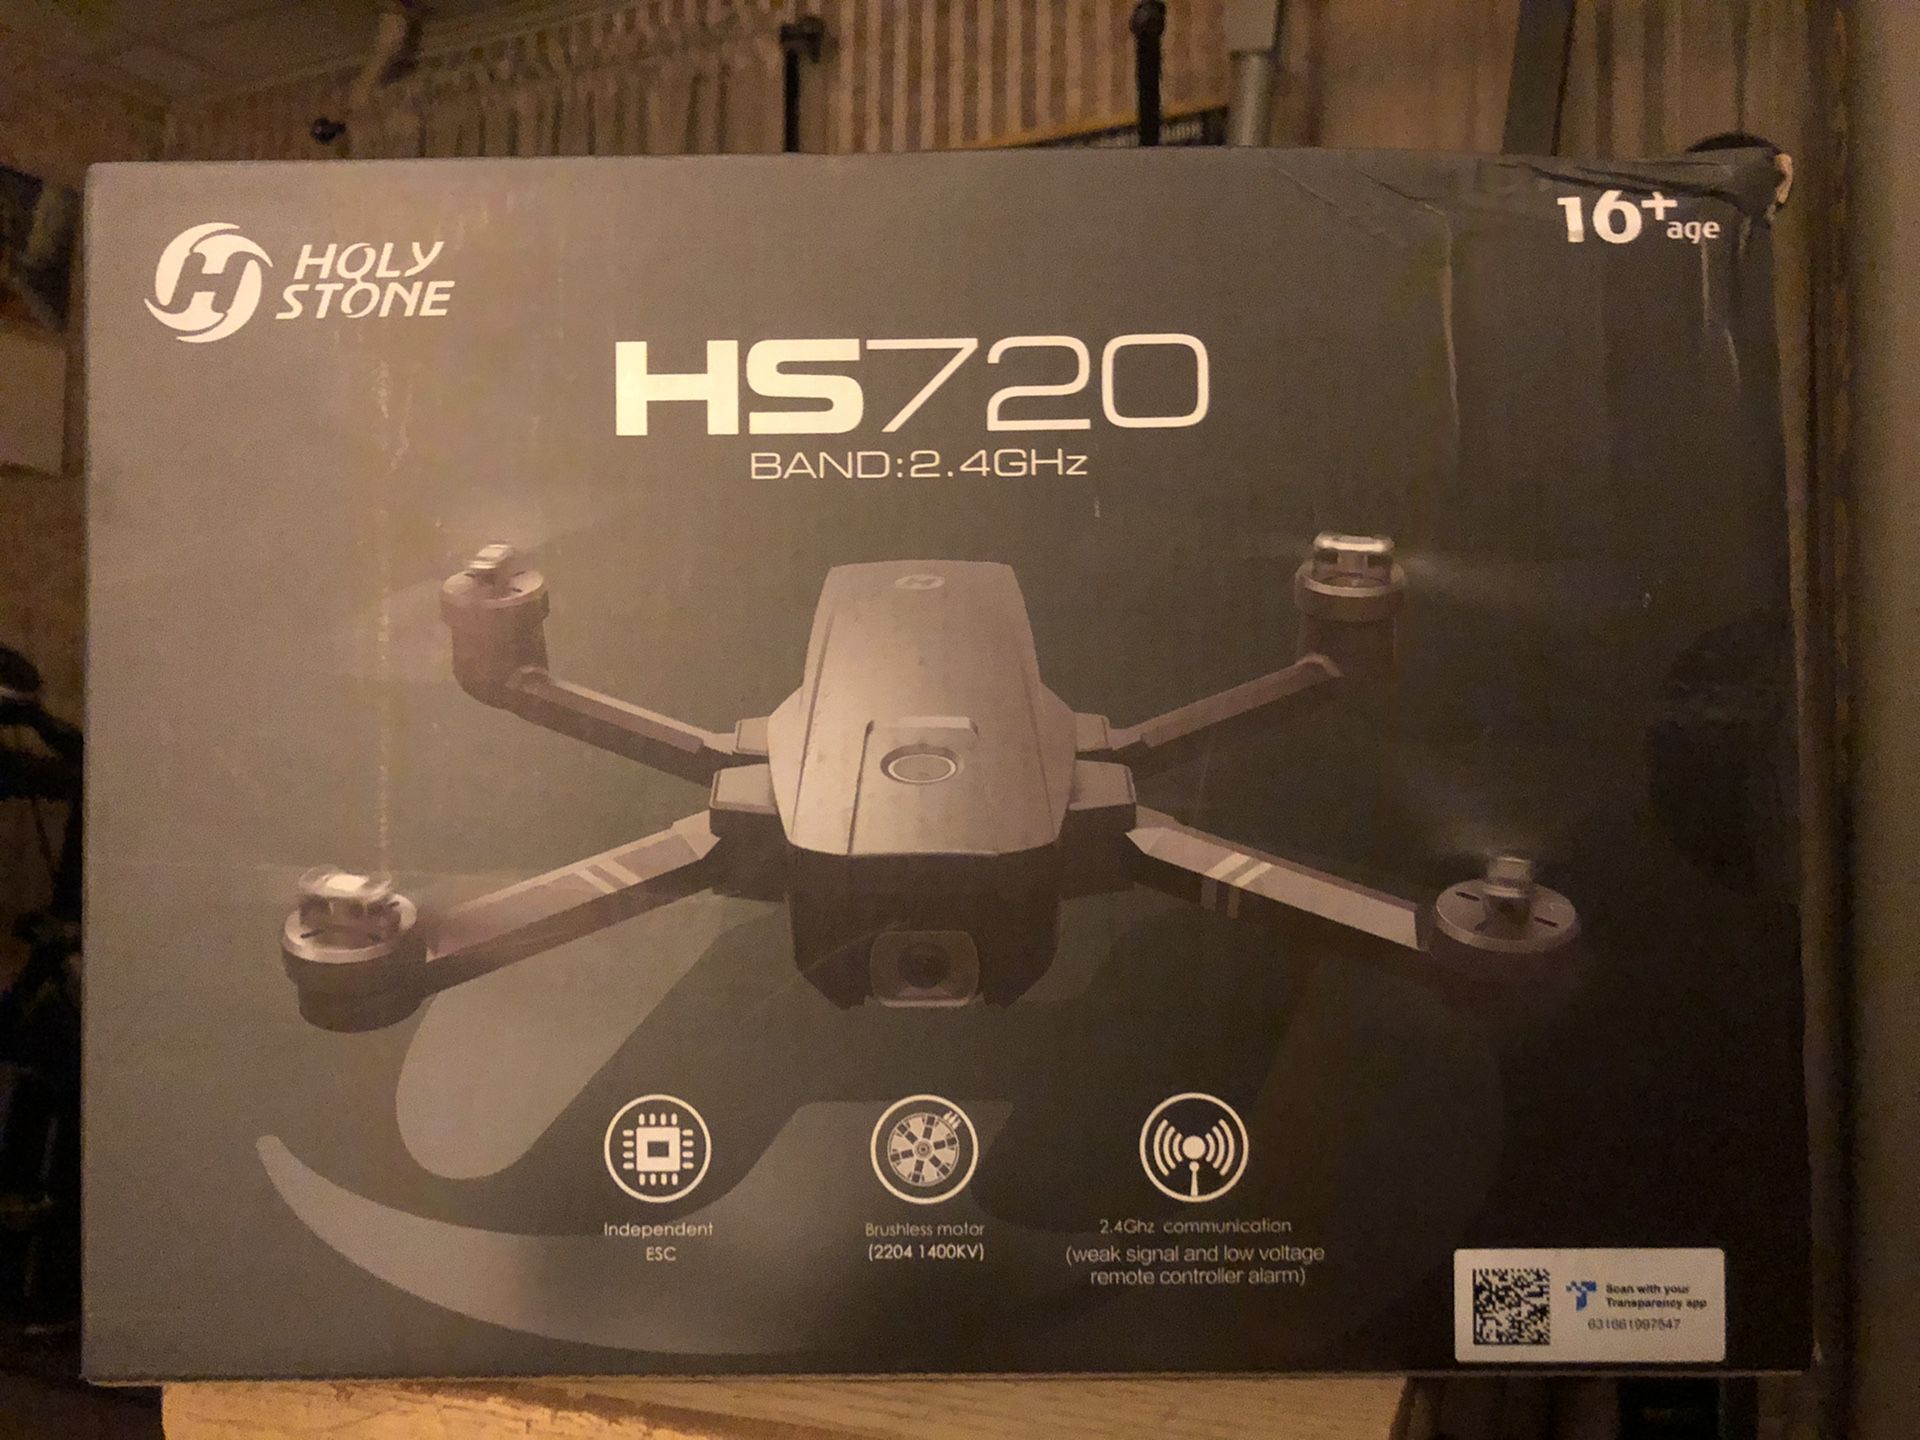 Brand New Holy Stone Drone HS720